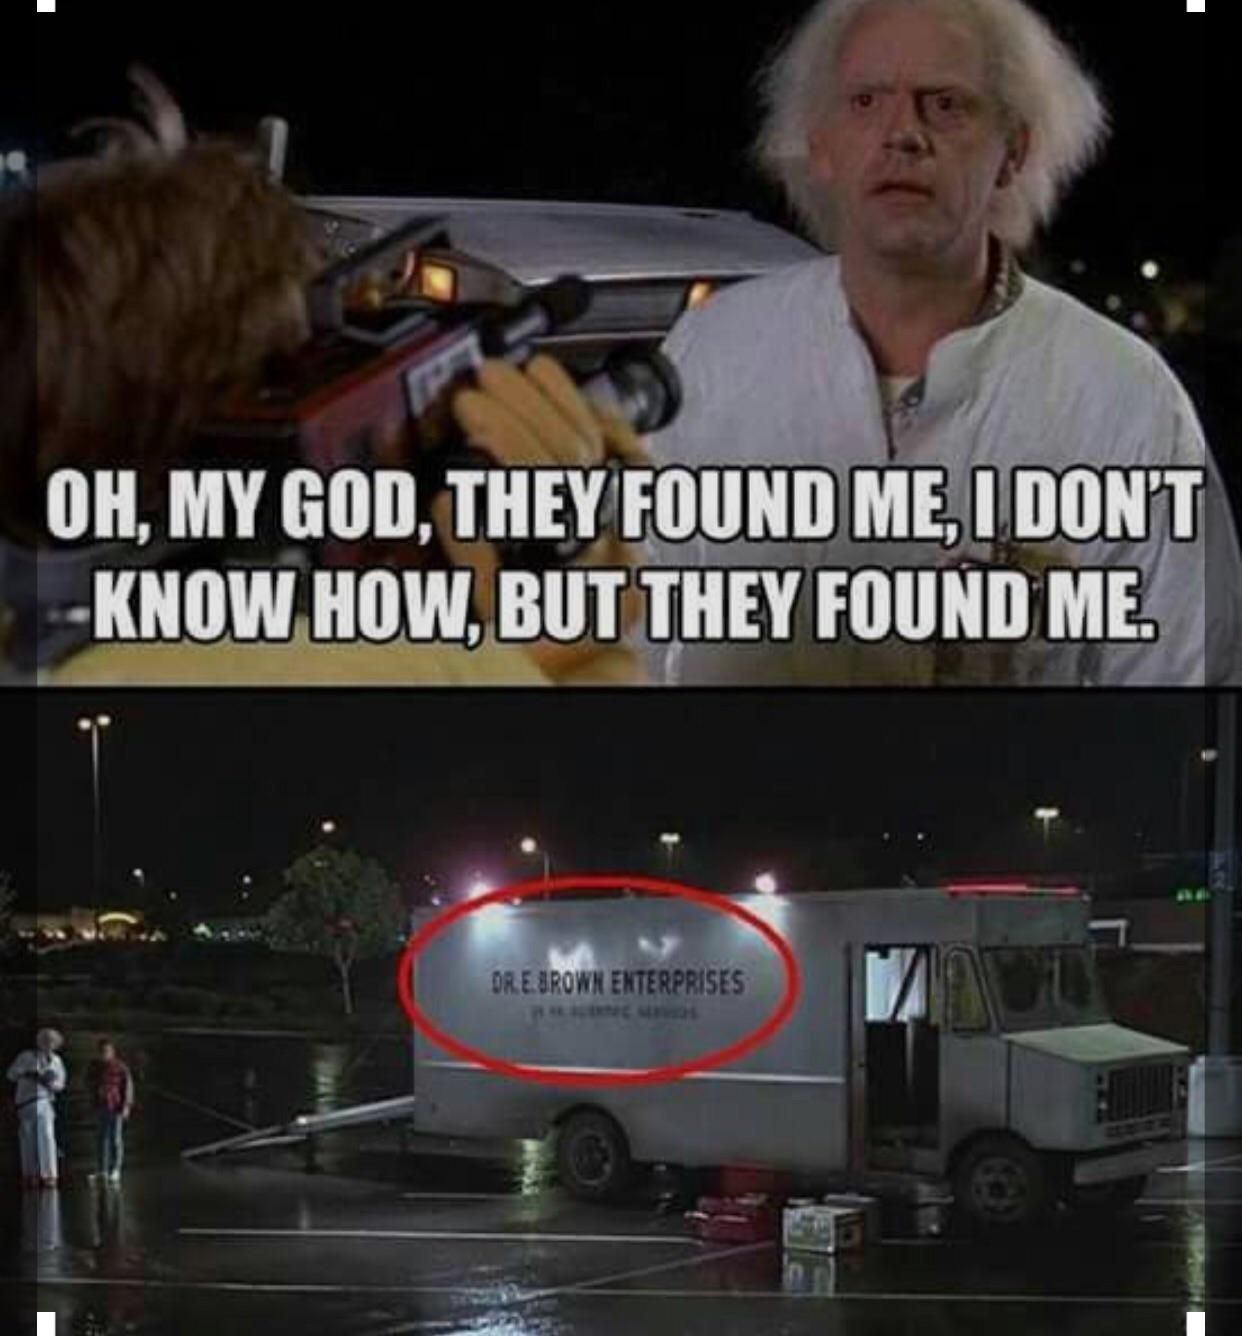 MARTY THEY FOUND ME!